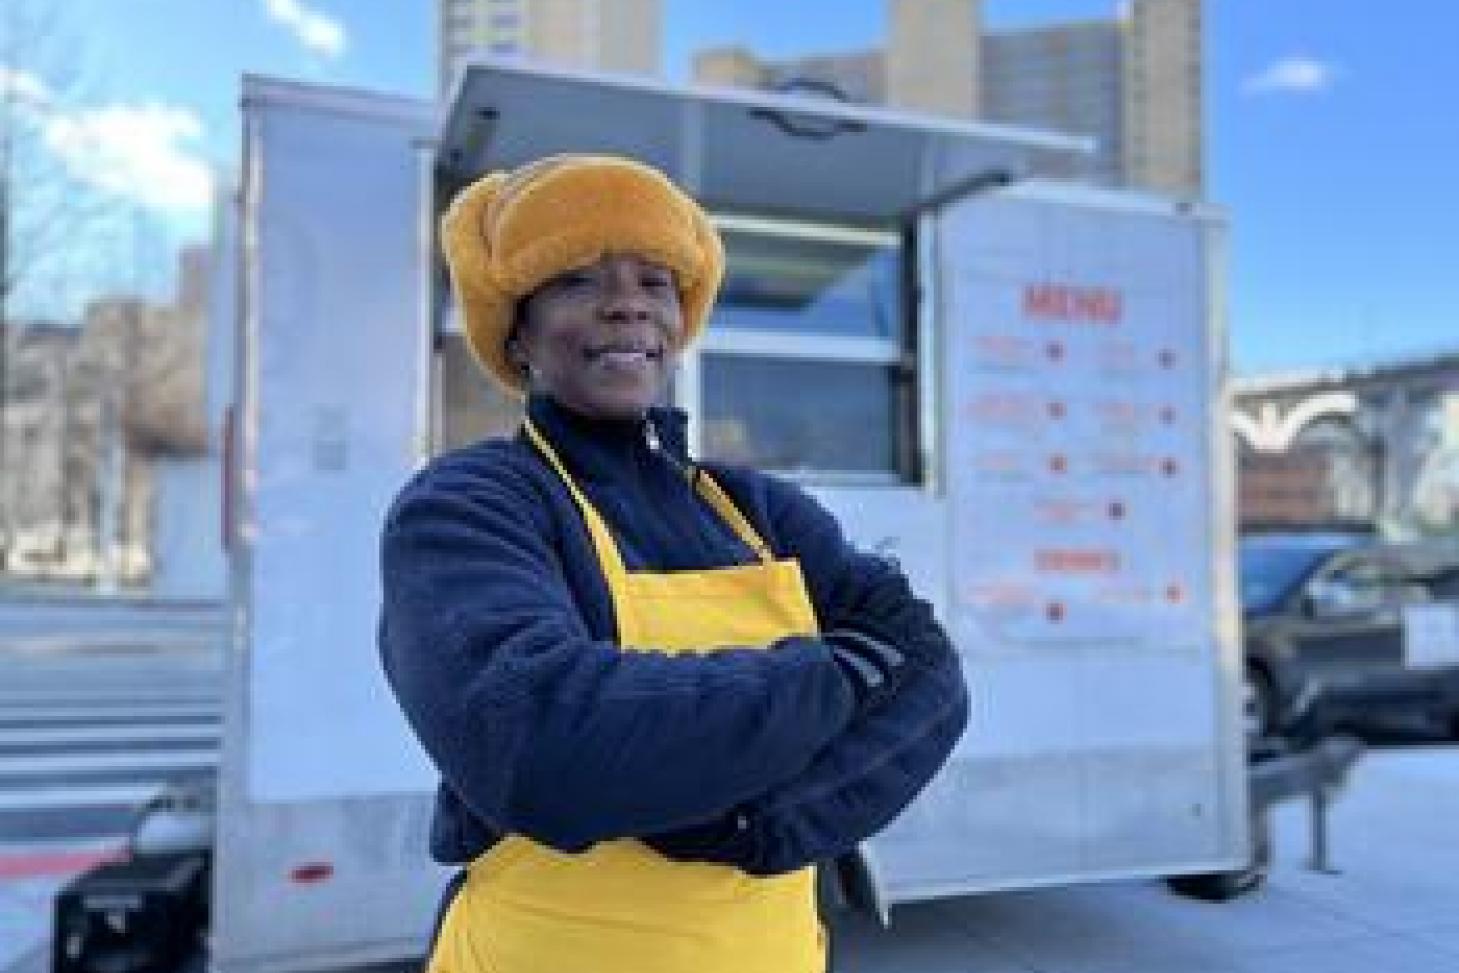 Harlem Local Vendor Program participant Dawn Demry, owner of the Little Hot Dog Wagon, sells her fare everywhere from a food truck outside the Business School to local restaurants and Key Food supermarkets.